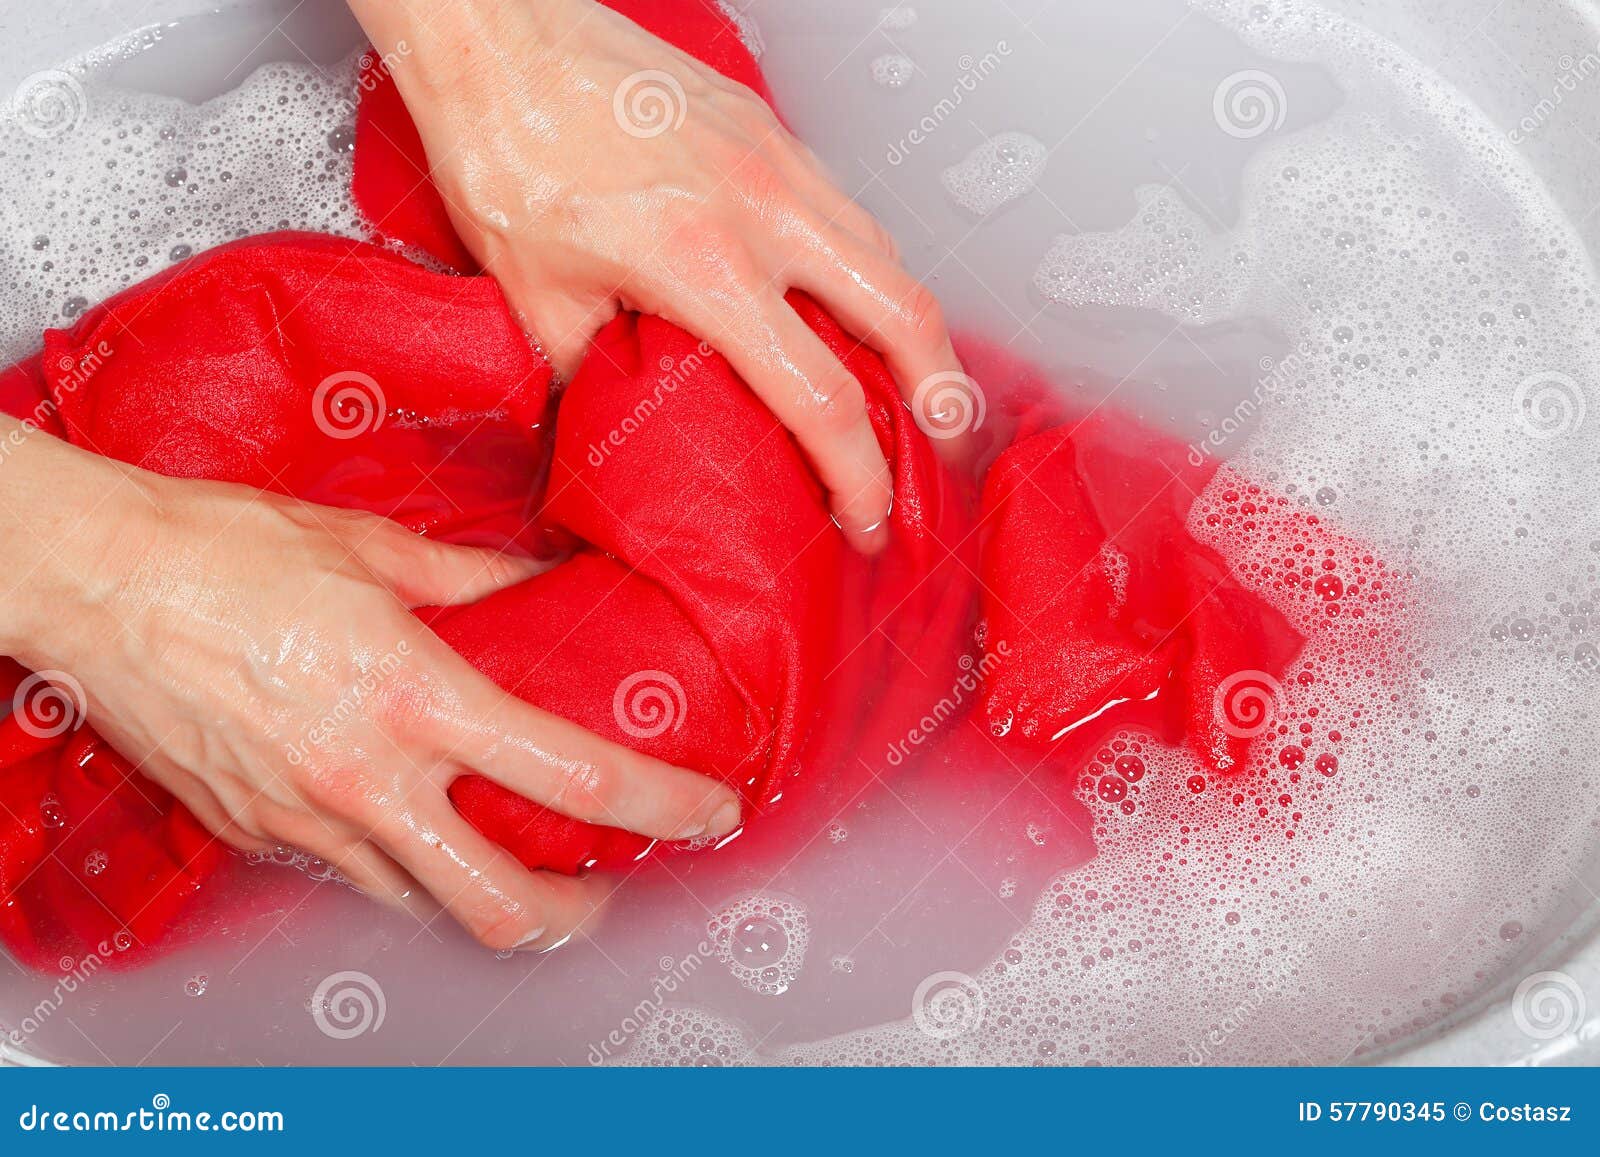 3,310 Hands Wash Clothes Stock Photos - Free & Royalty-Free Stock Photos  from Dreamstime